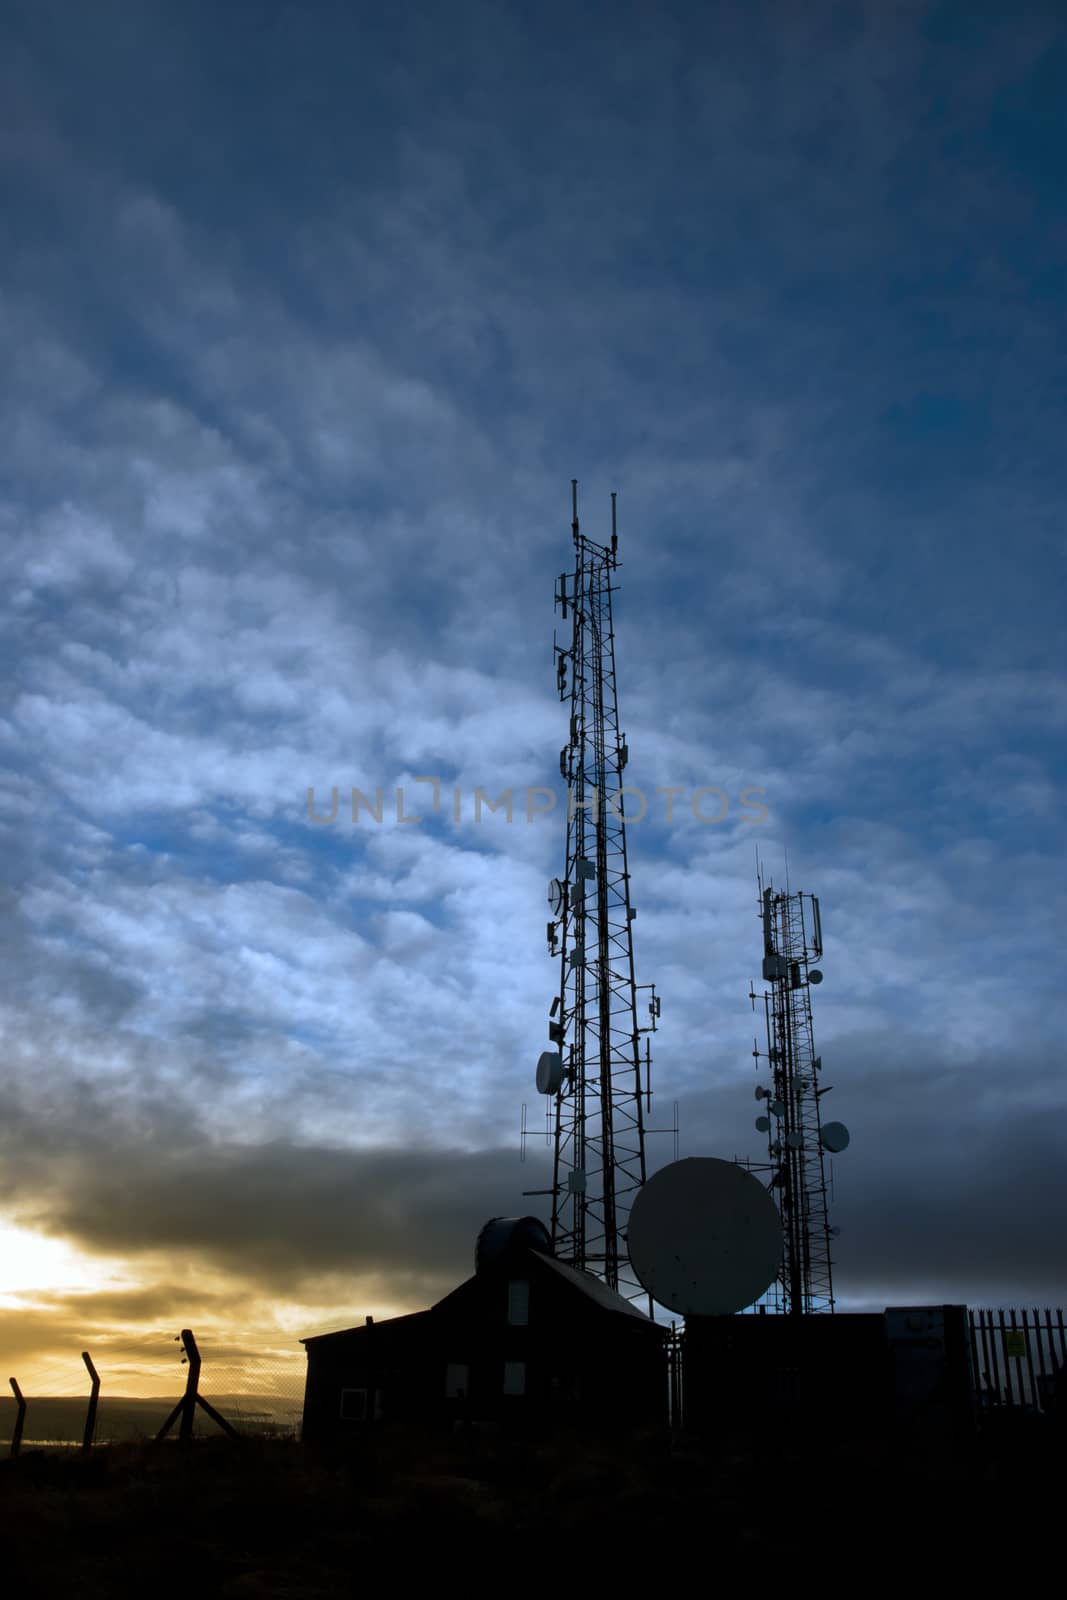 transmission tower on Knockanore hill at dusk by morrbyte